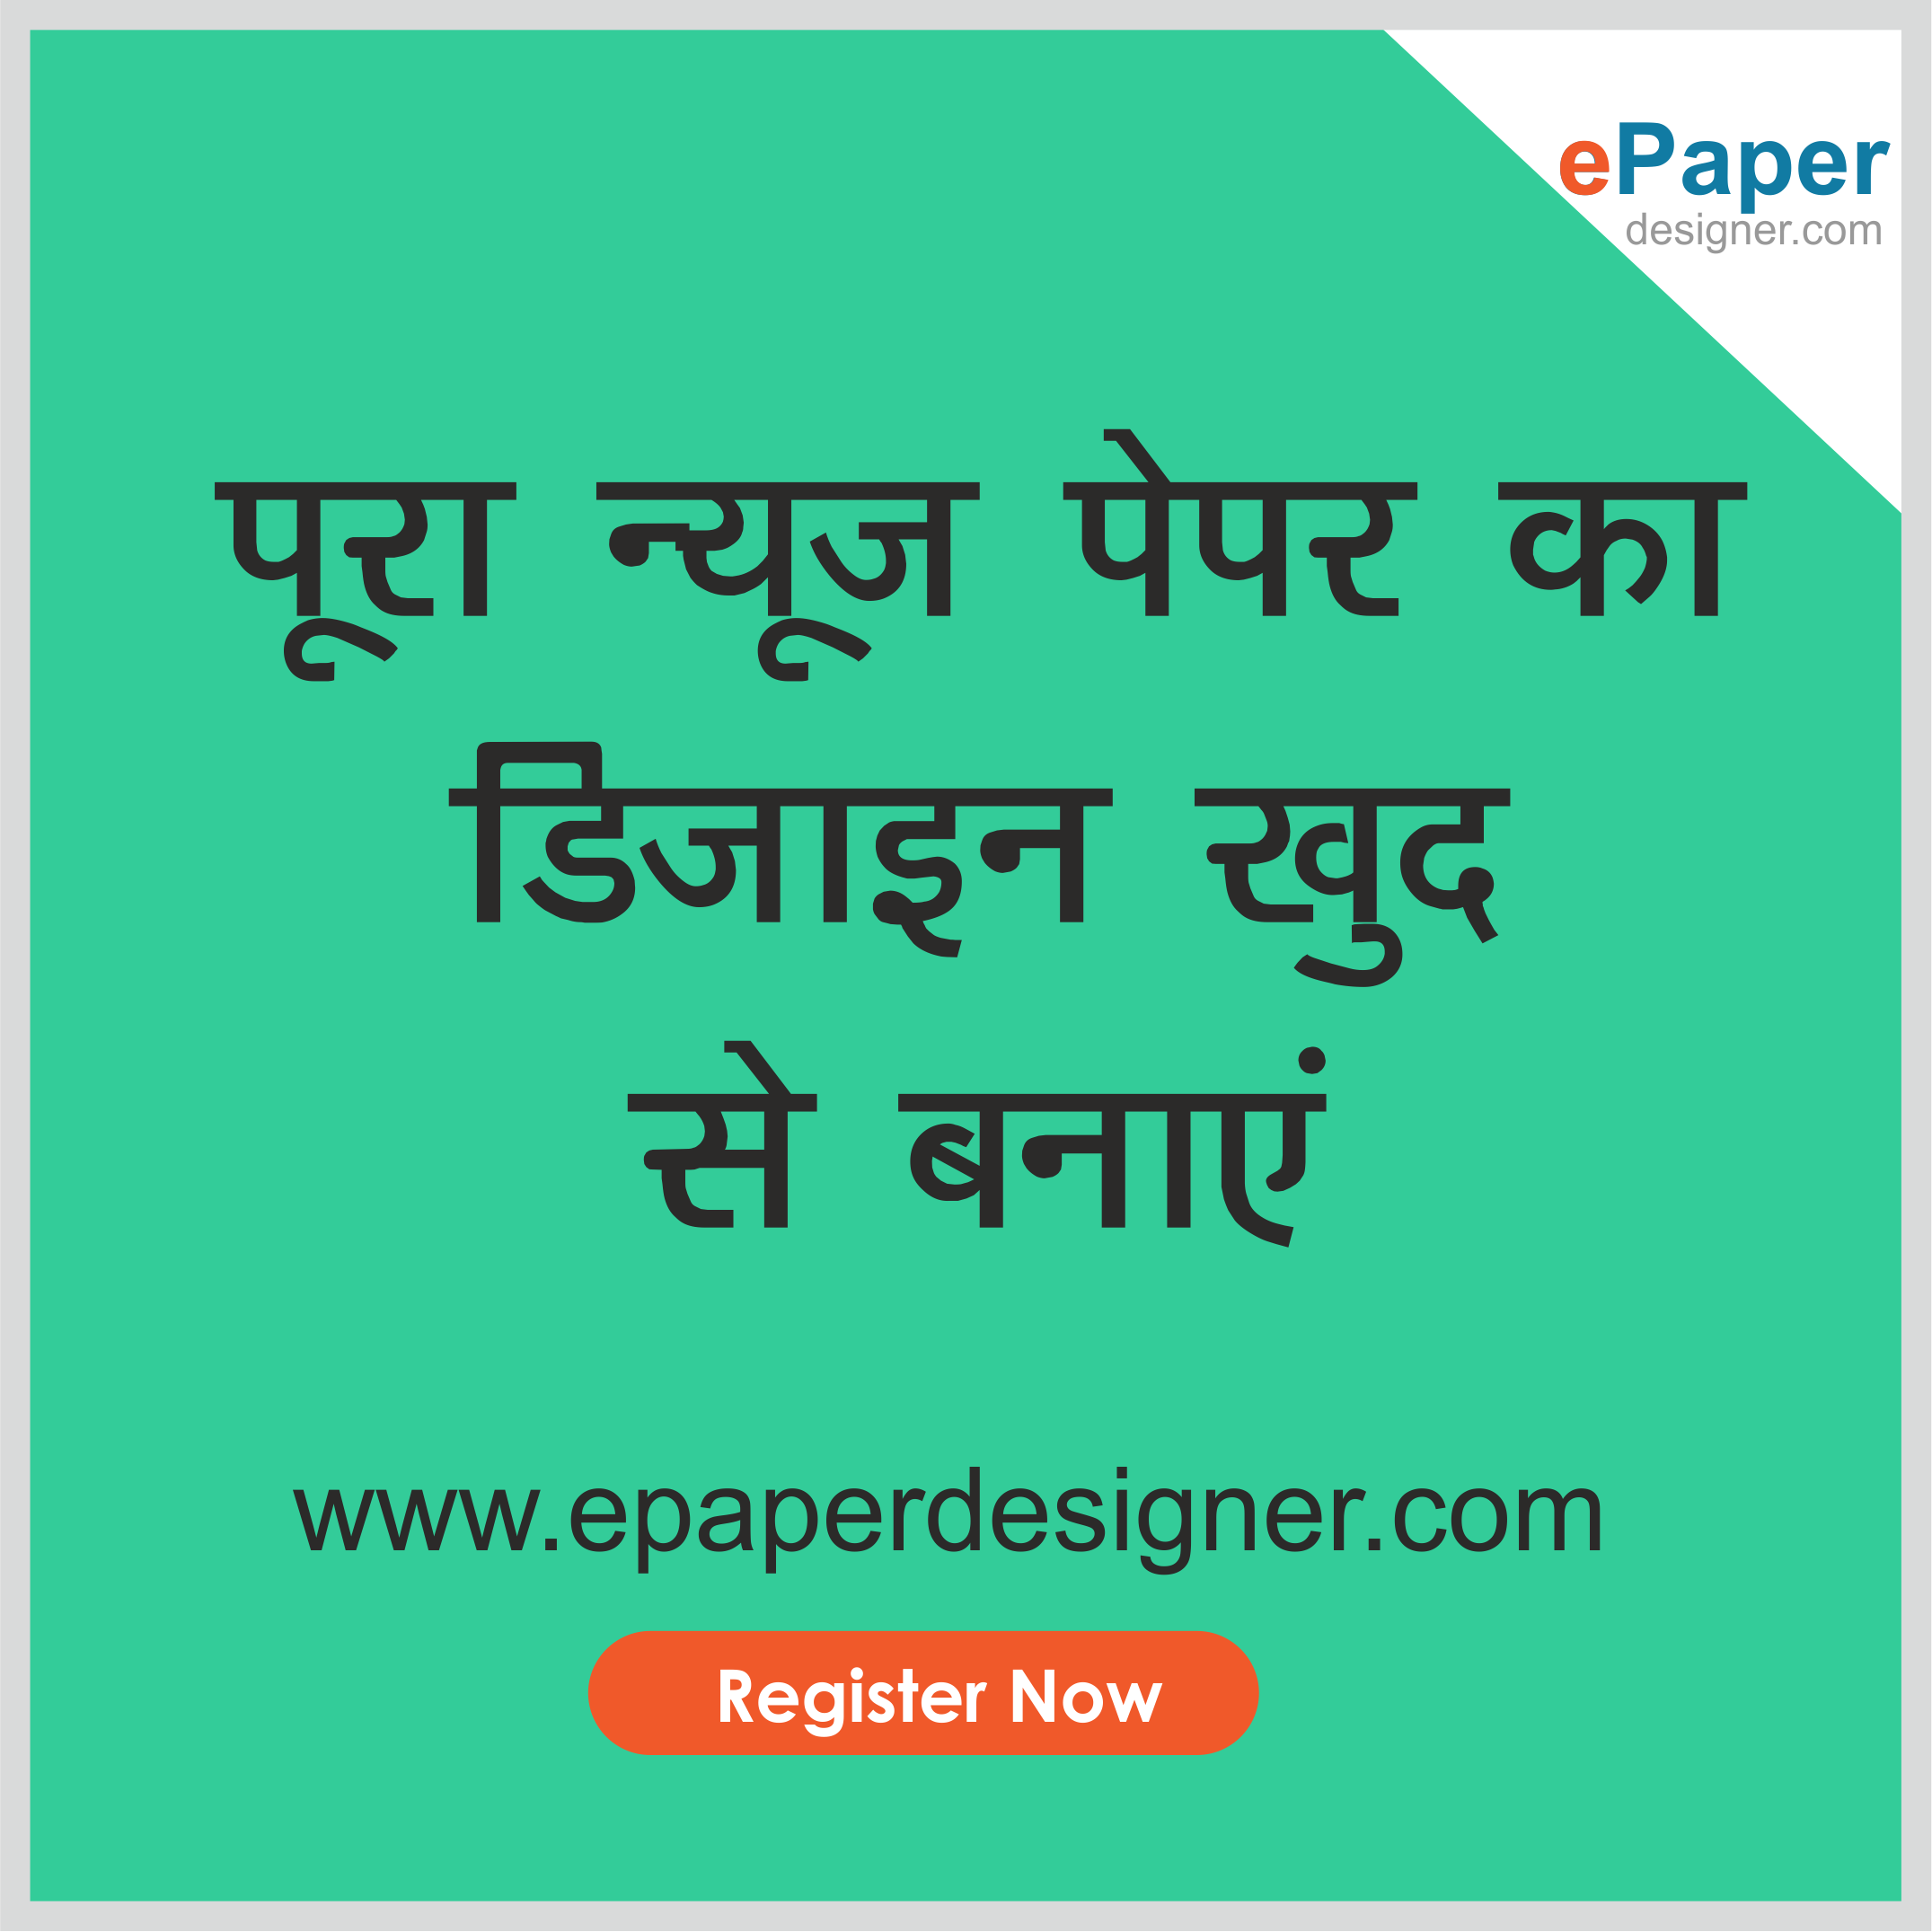 You are currently viewing E-Paper Design CMS Software | Try ePaper designer.com